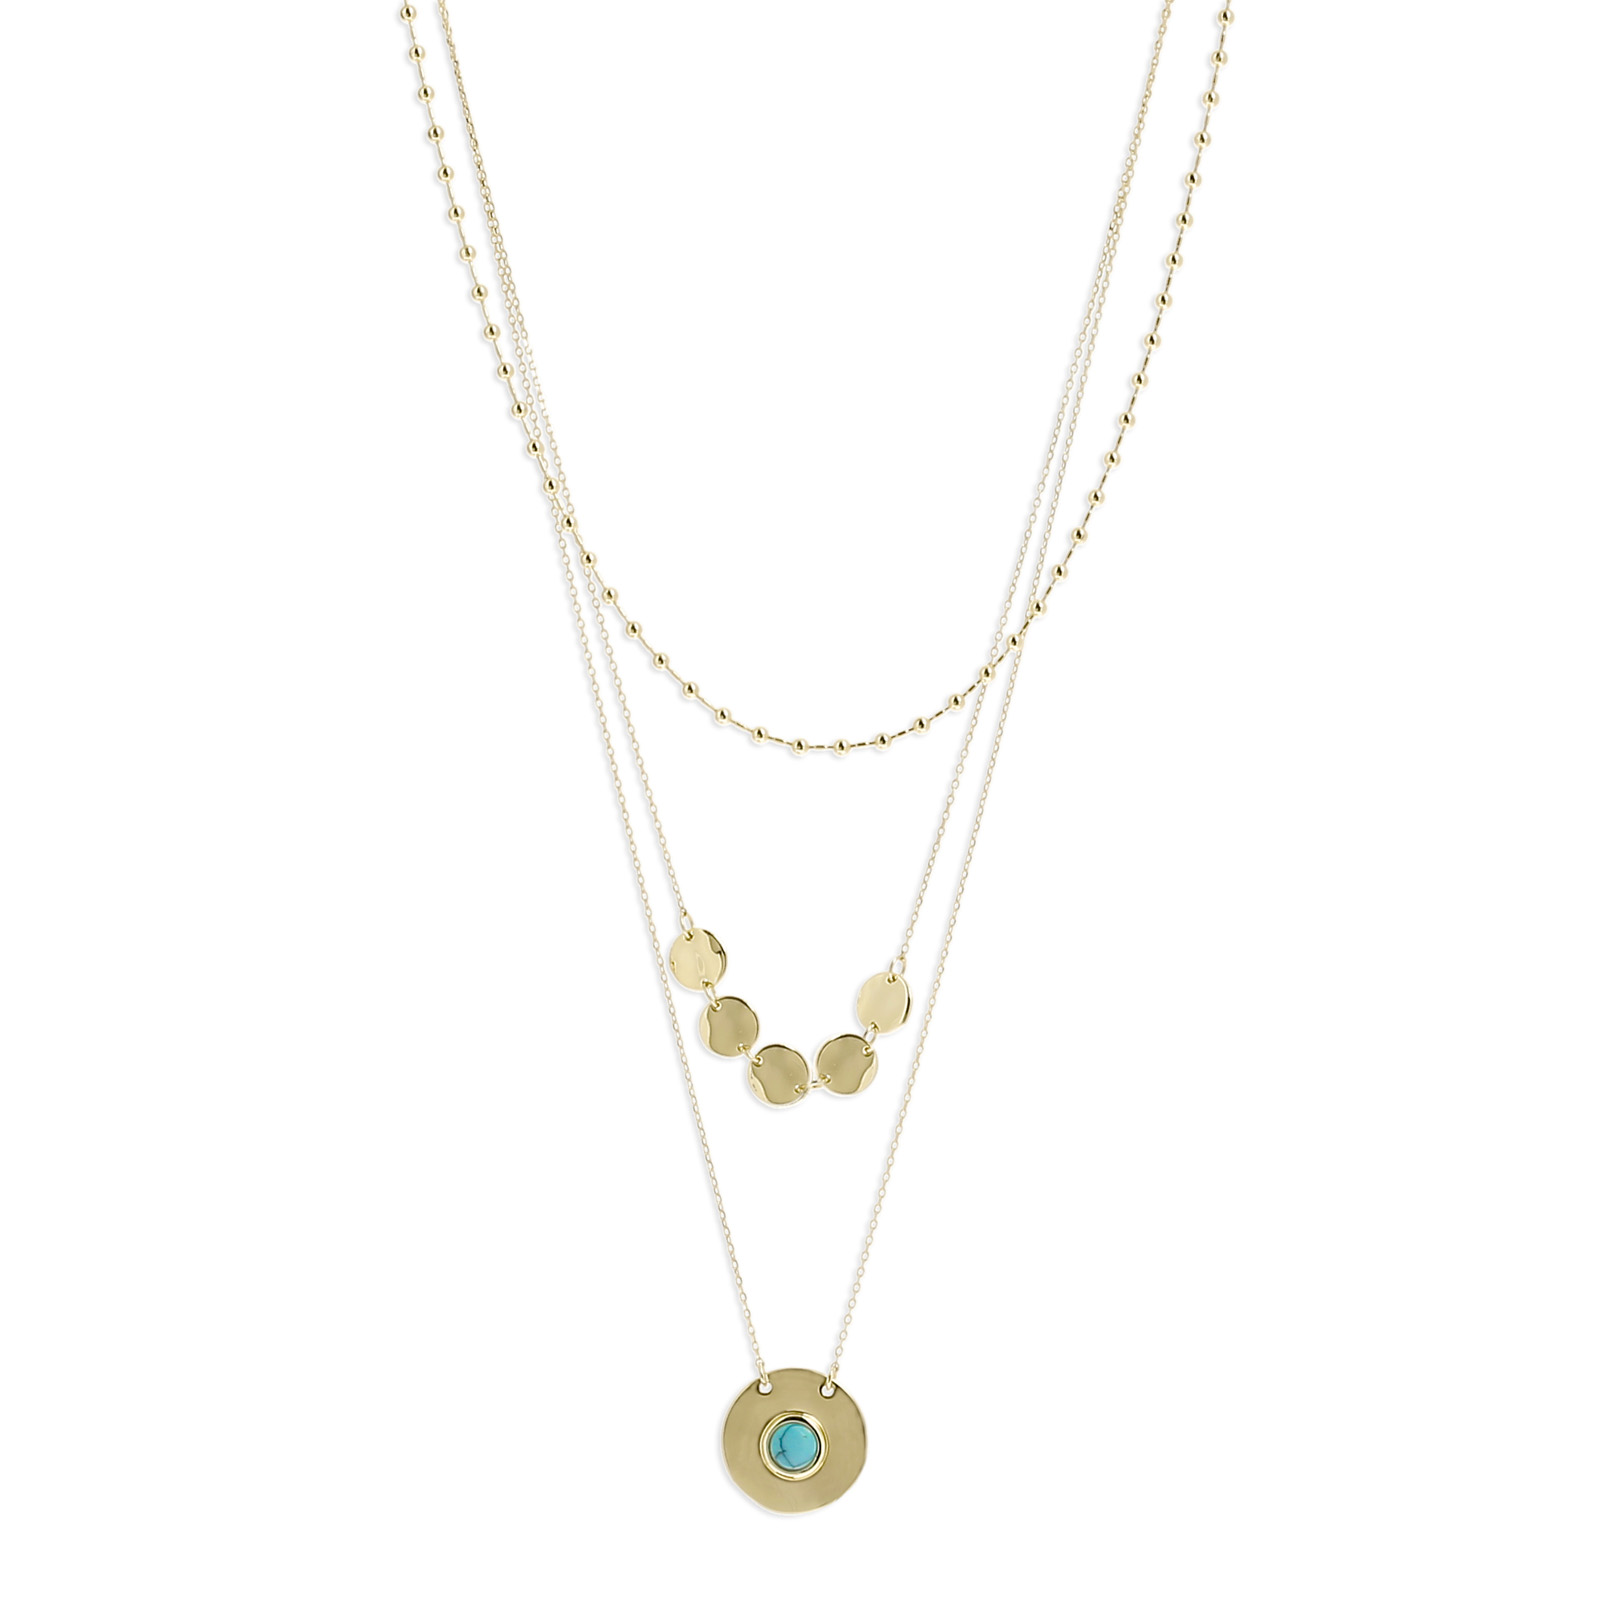 Collier 3 rangs médaille turquoise